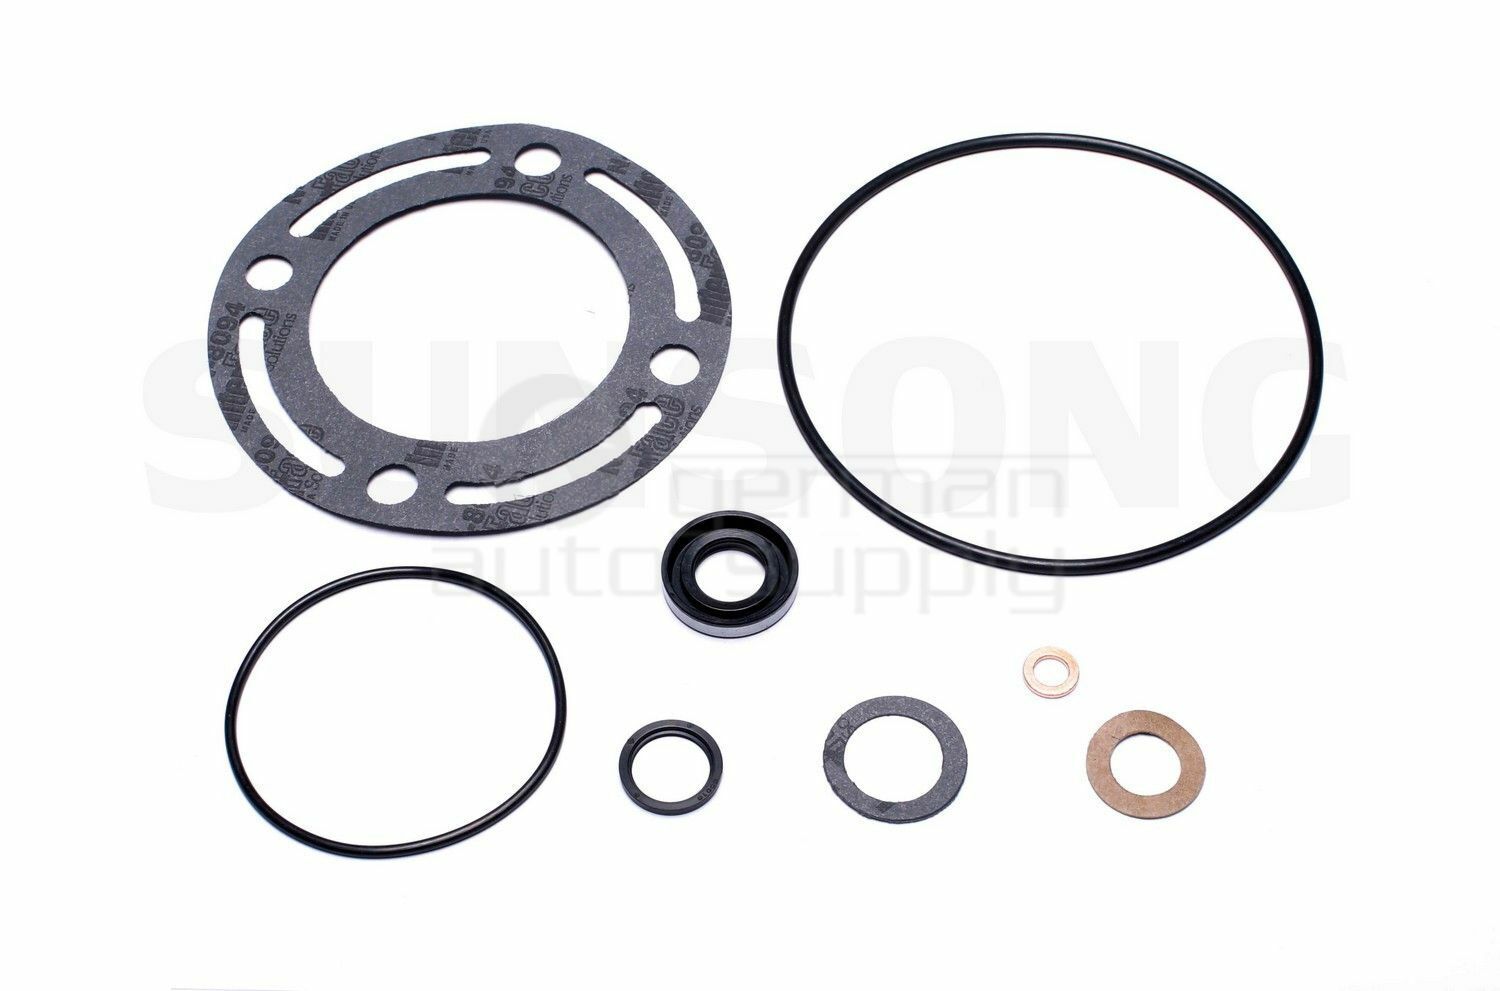 Sunsong Power Steering Pump Seal Kit 8401029 for Ford Lincoln Mercury